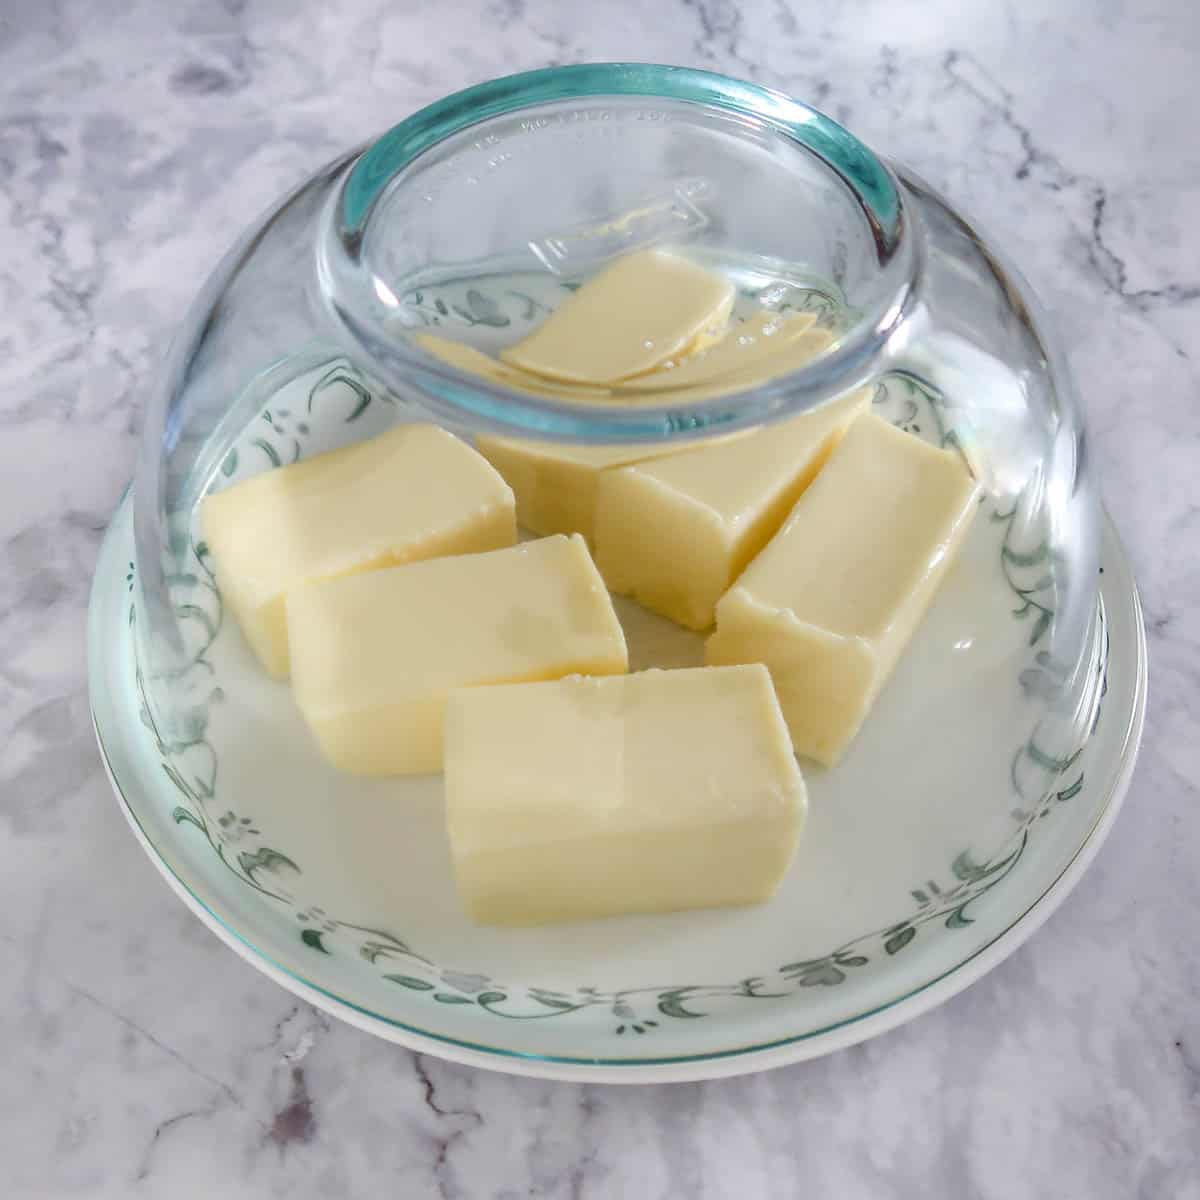 Side view of six half sticks of butter on a white plate with a clear bowl on top all on a white marbled table.